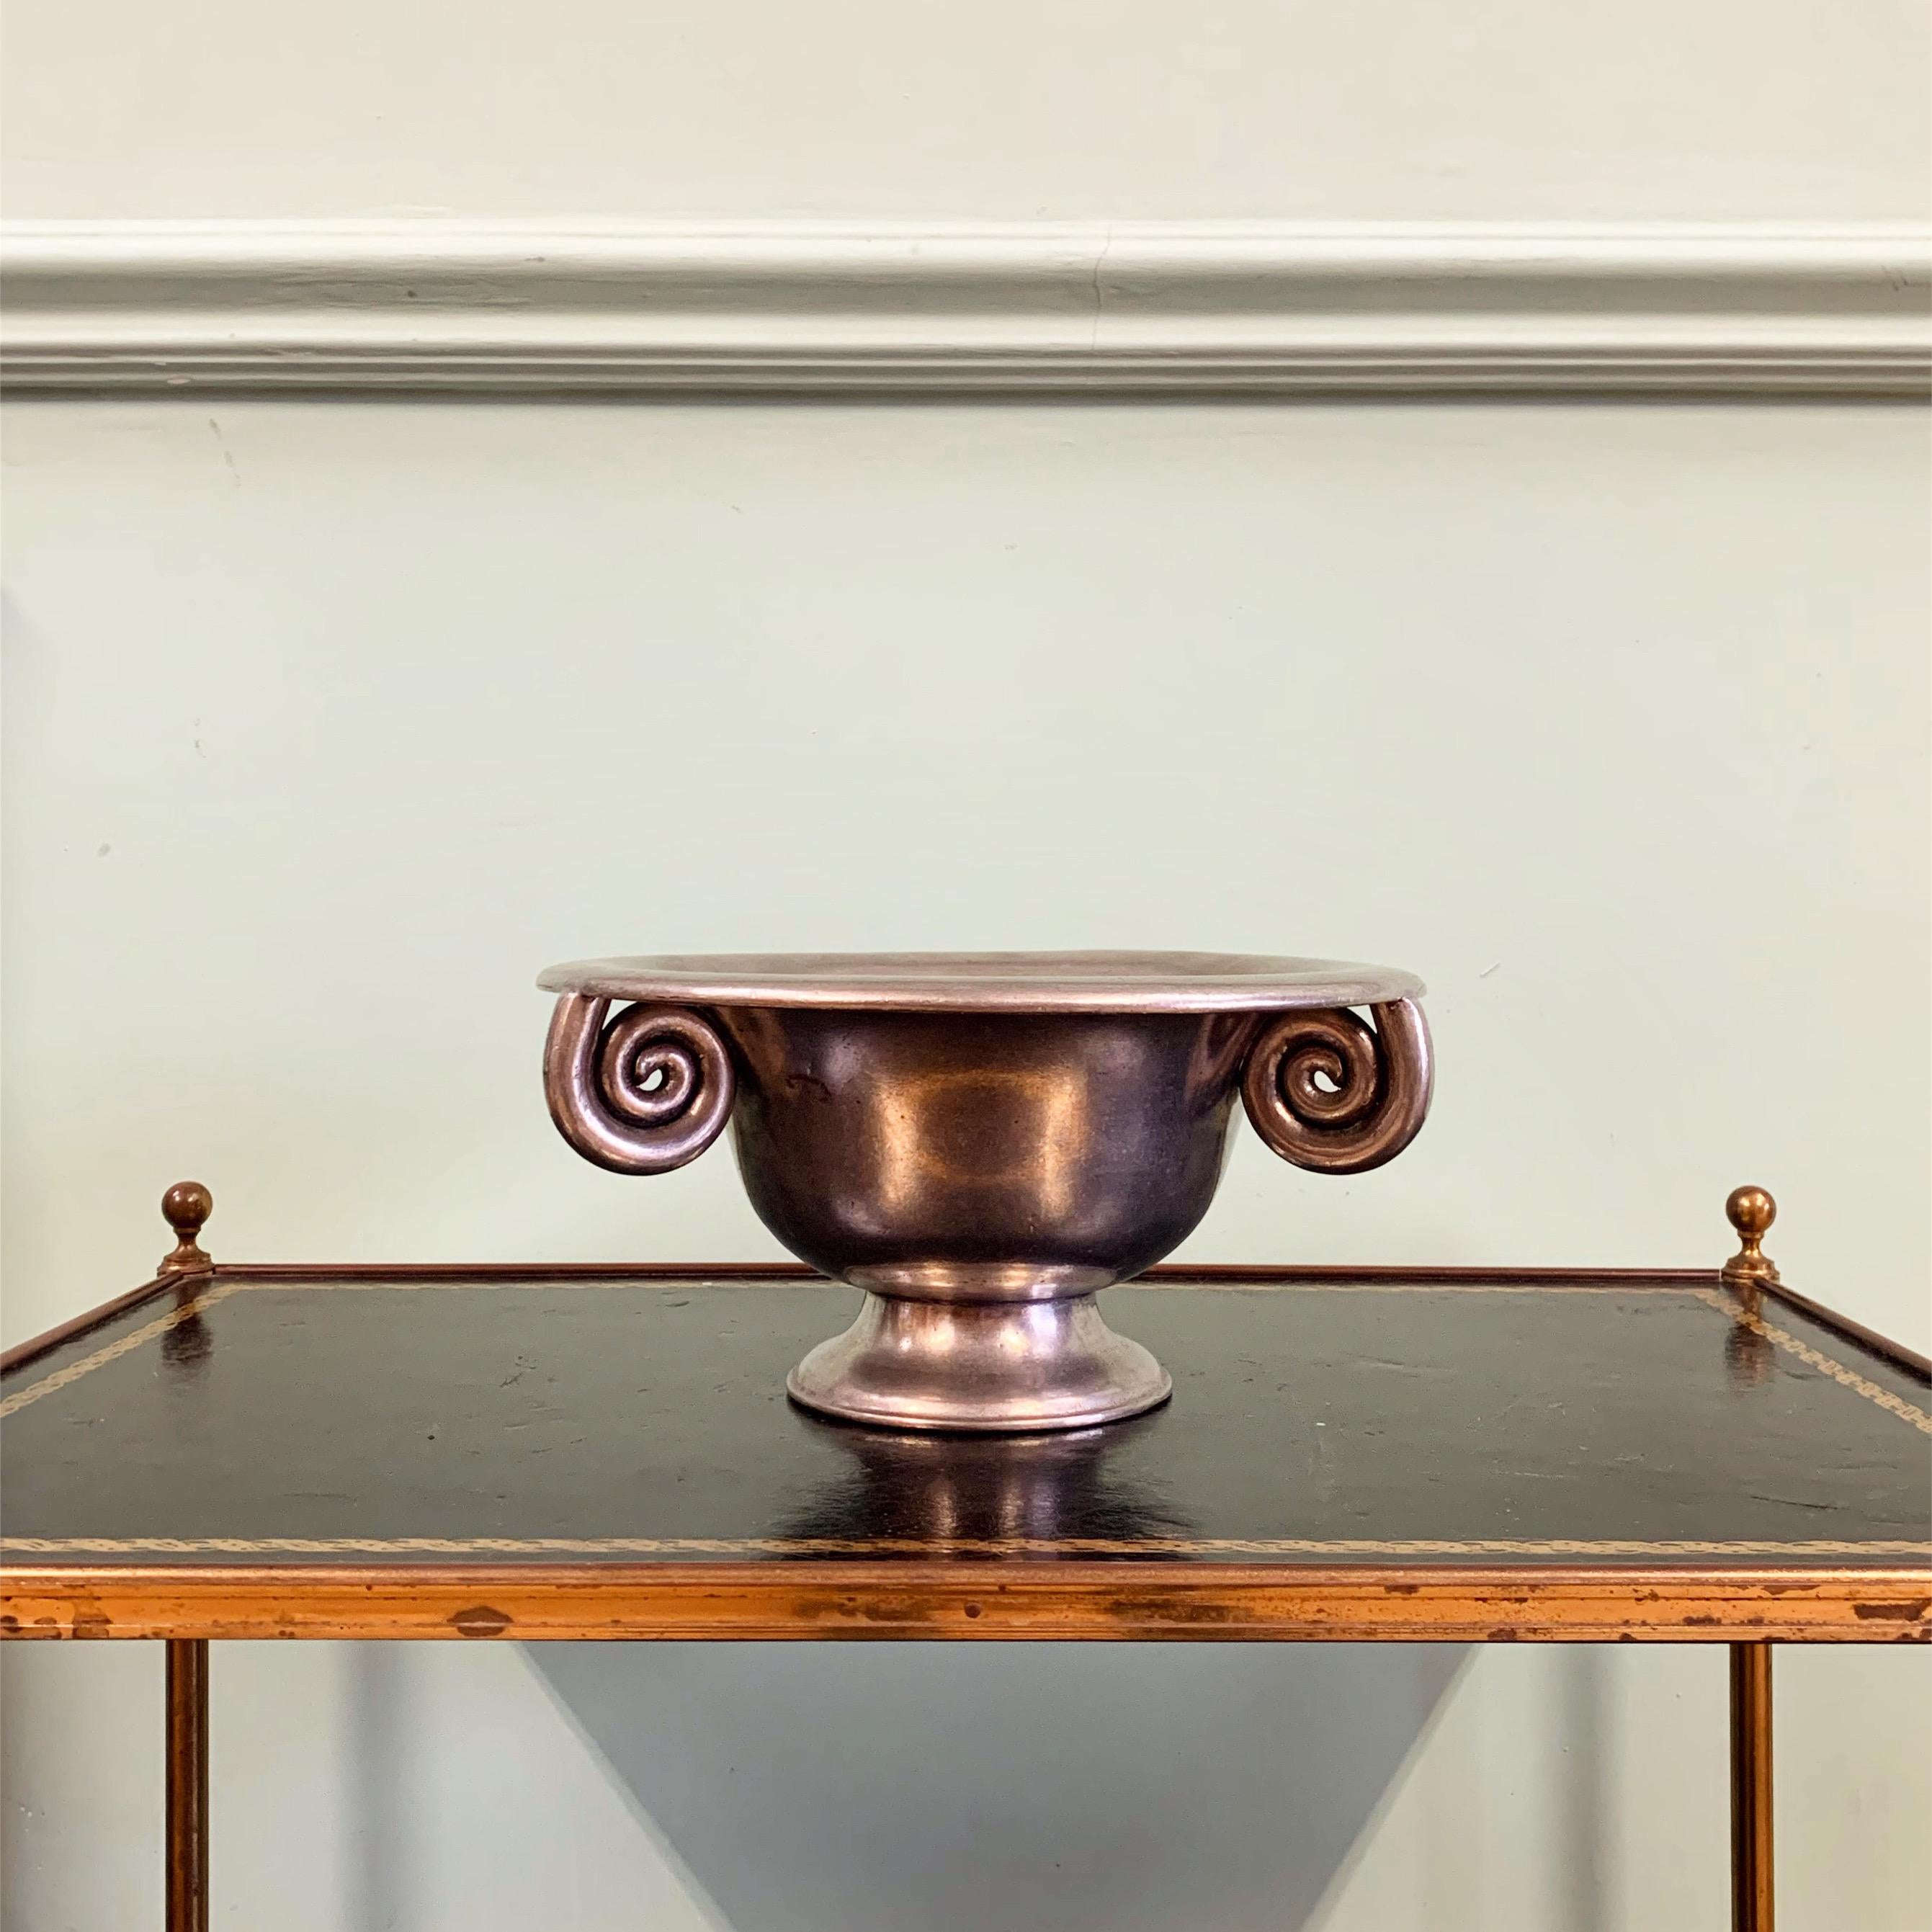 A contemporary pewter tazza of antique design with three scrolled handles - luscious colour and heavy weight.

Continental, Mid Twentieth Century

Inquire about this piece

H 12 x W 27 cms

